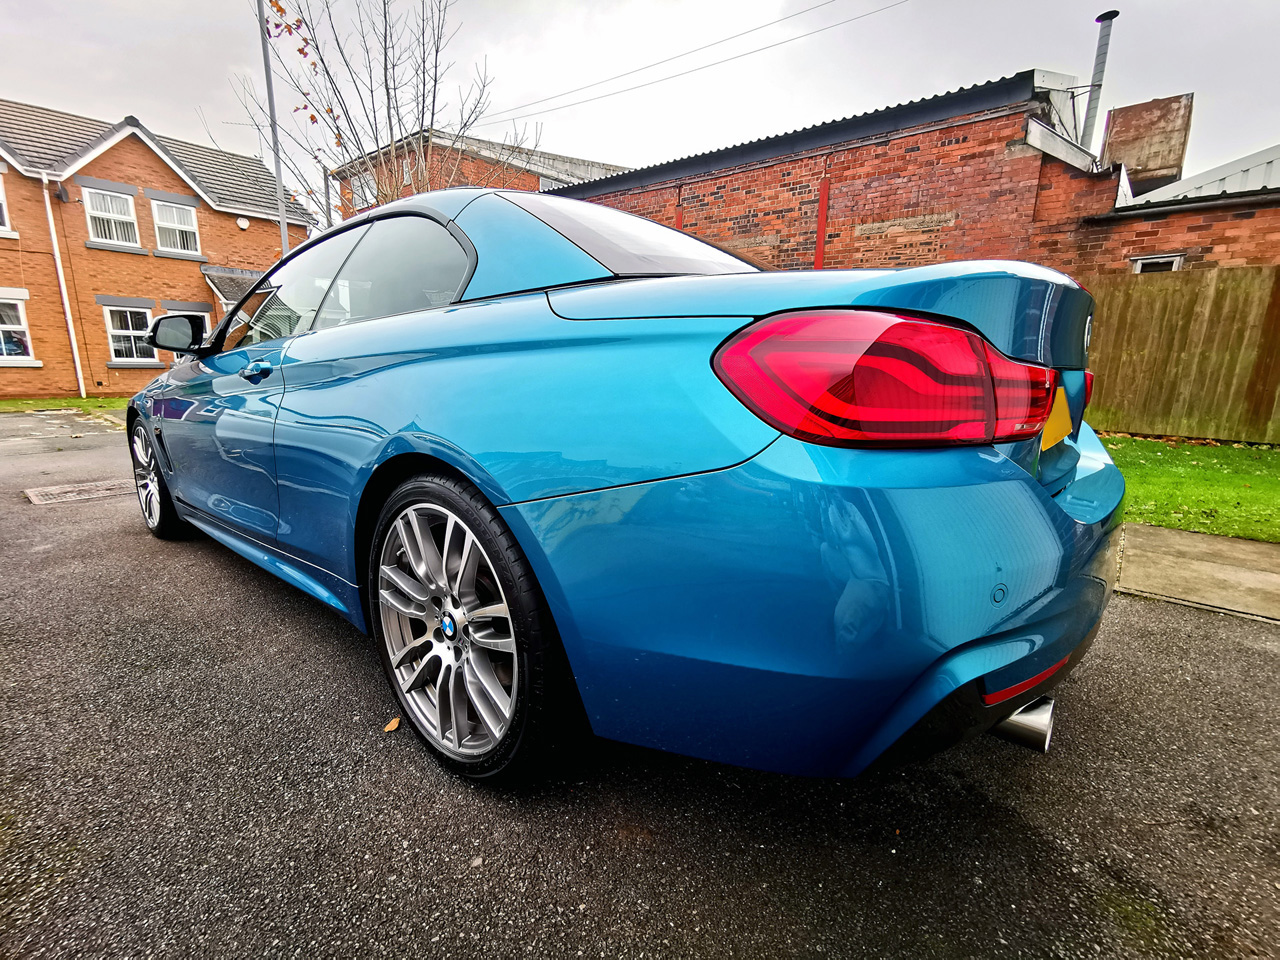 2017 BMW 440i (F33) - Page 1 - Readers' Cars - PistonHeads UK